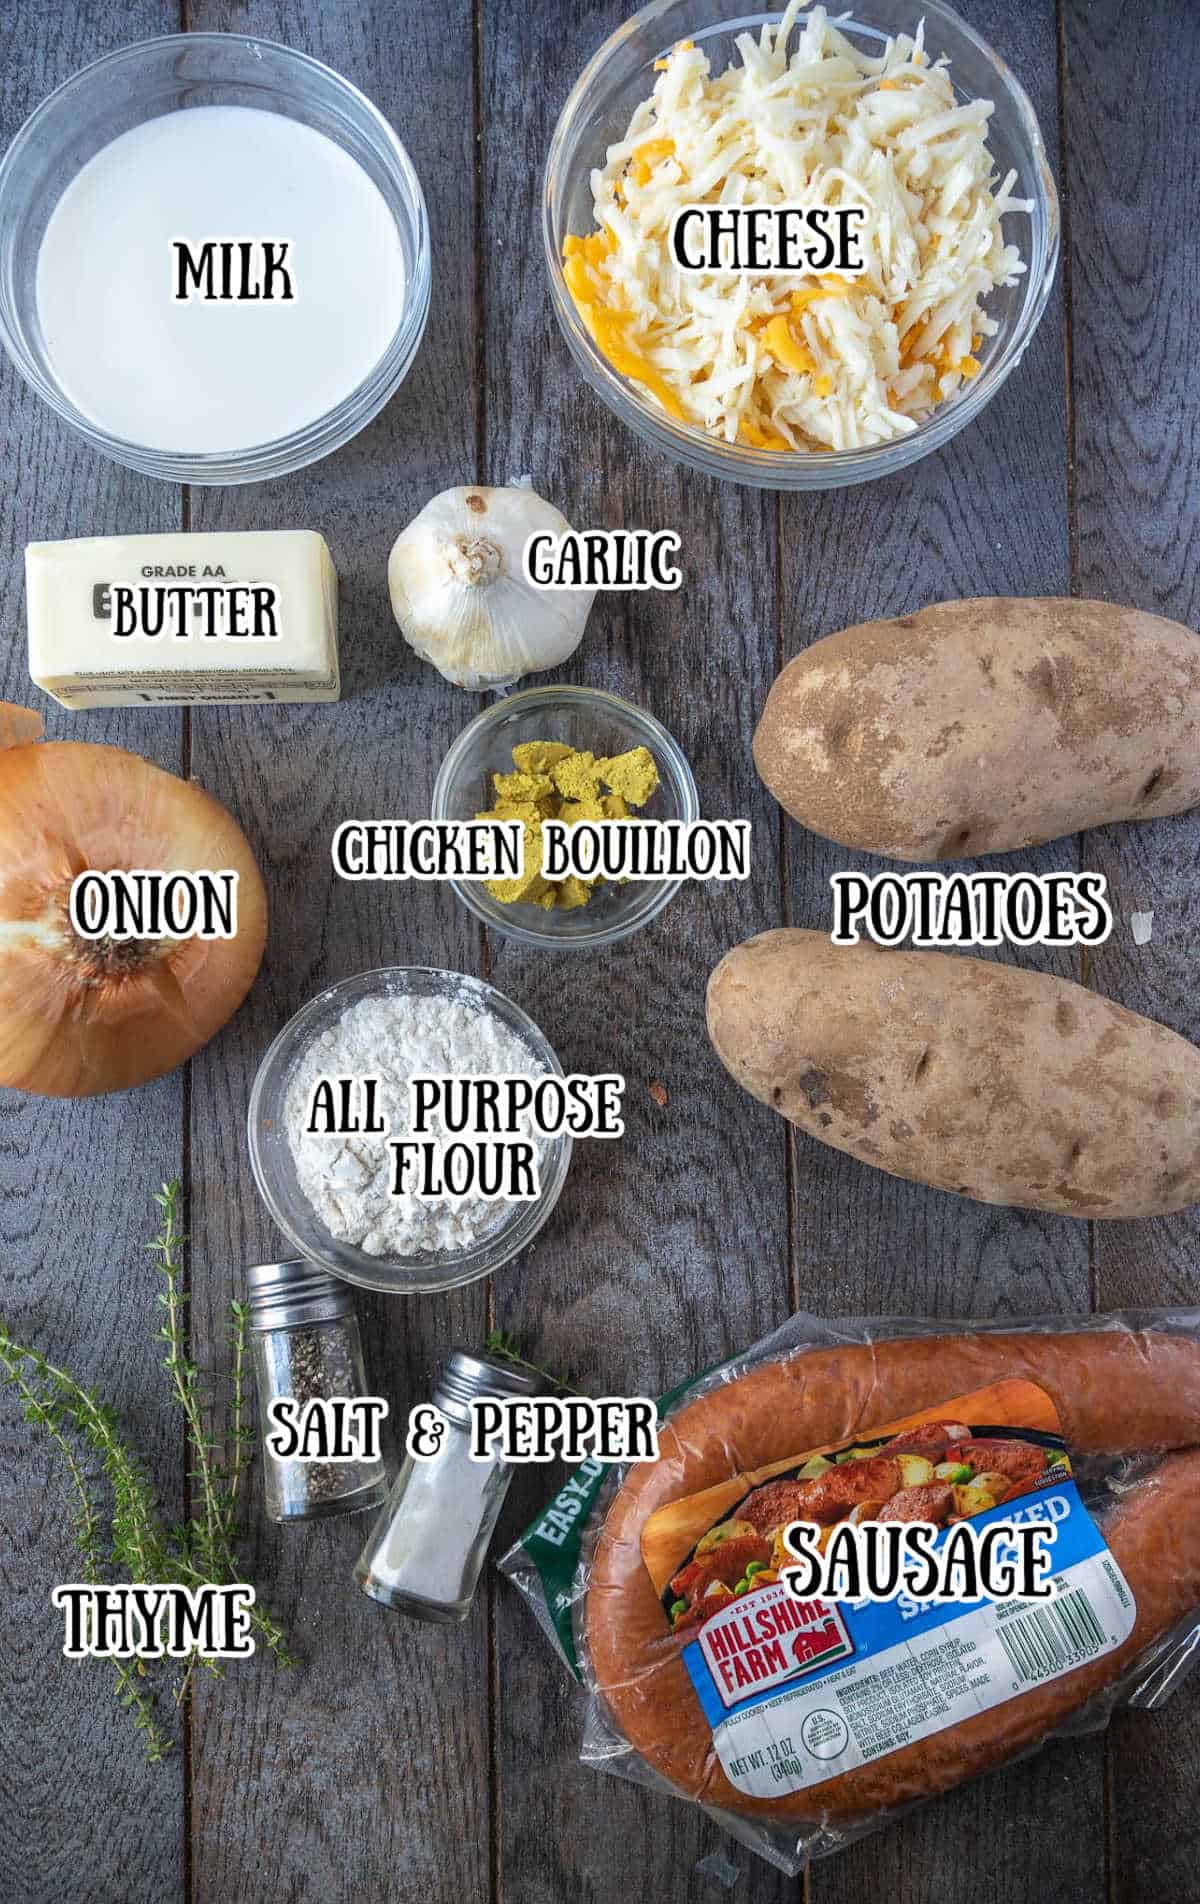 All the ingredients needed for this recipe